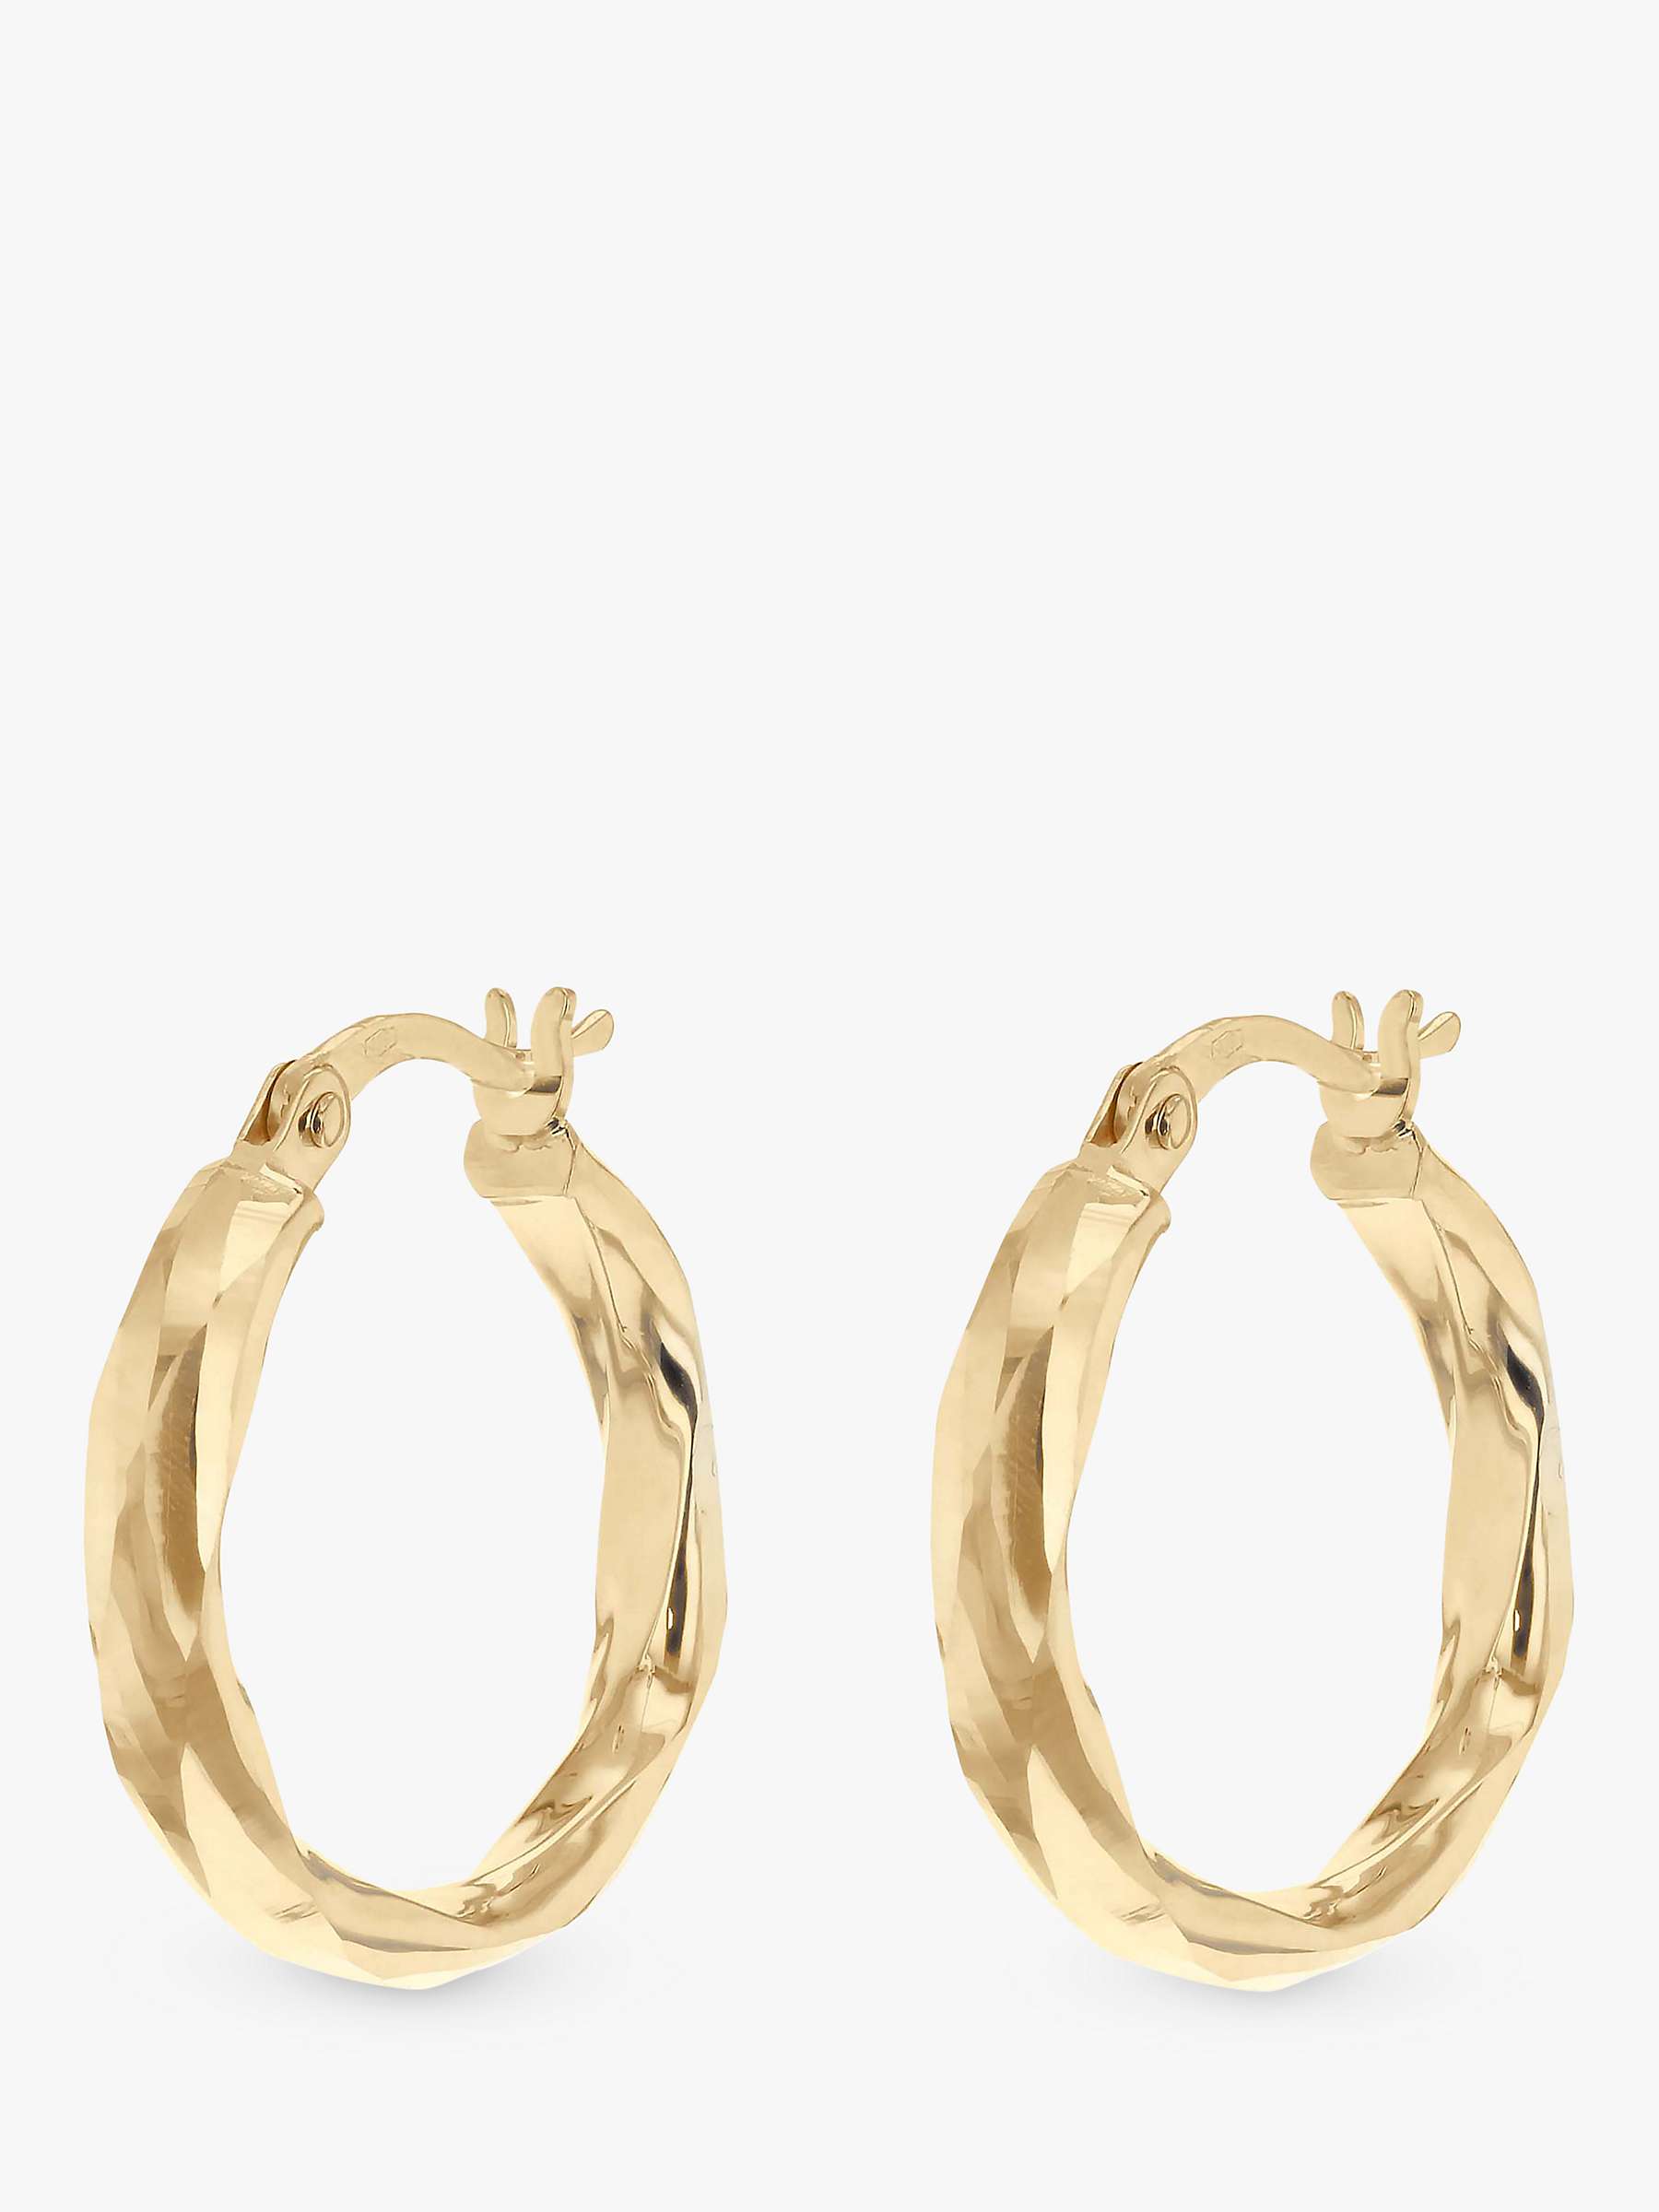 Buy IBB 9ct Gold Faceted Creole Hoop Earrings, Gold Online at johnlewis.com